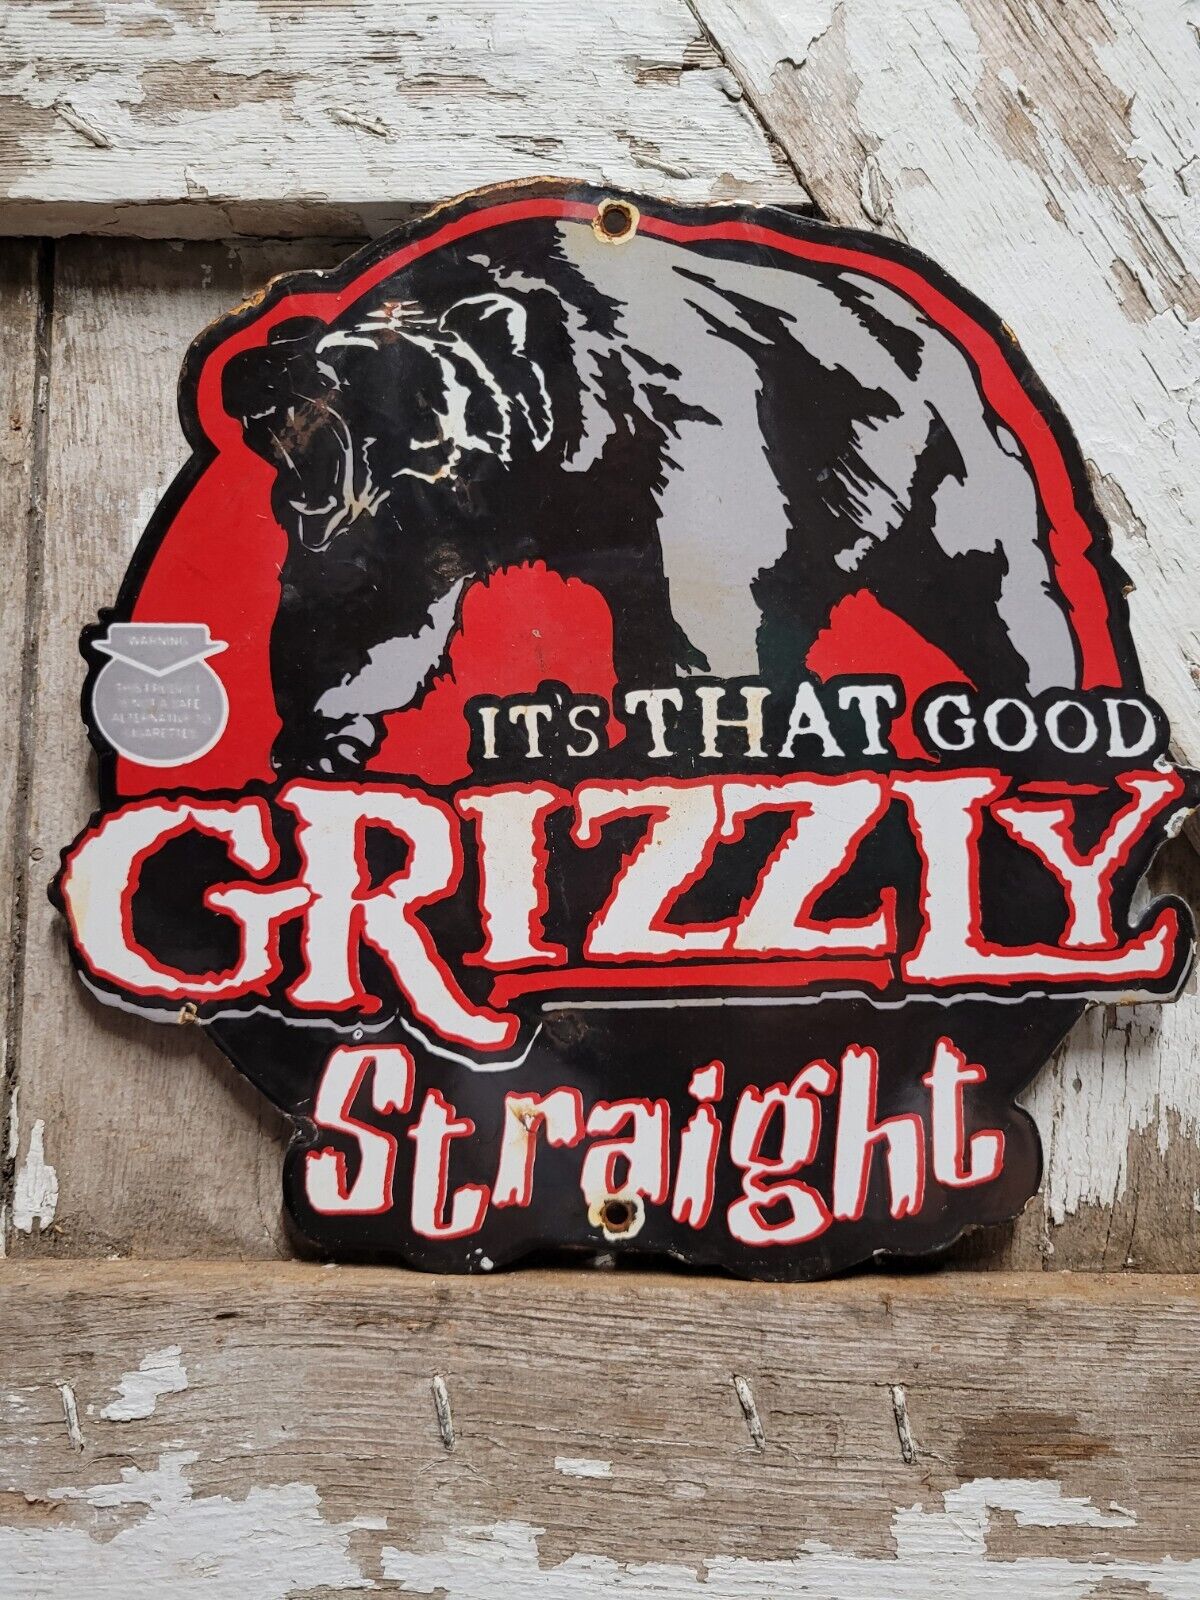 VINTAGE GRIZZLY STRAIGHT PORCELAIN SIGN CHEWING TOBACCO CIGARETTE SMOKING CIGAR